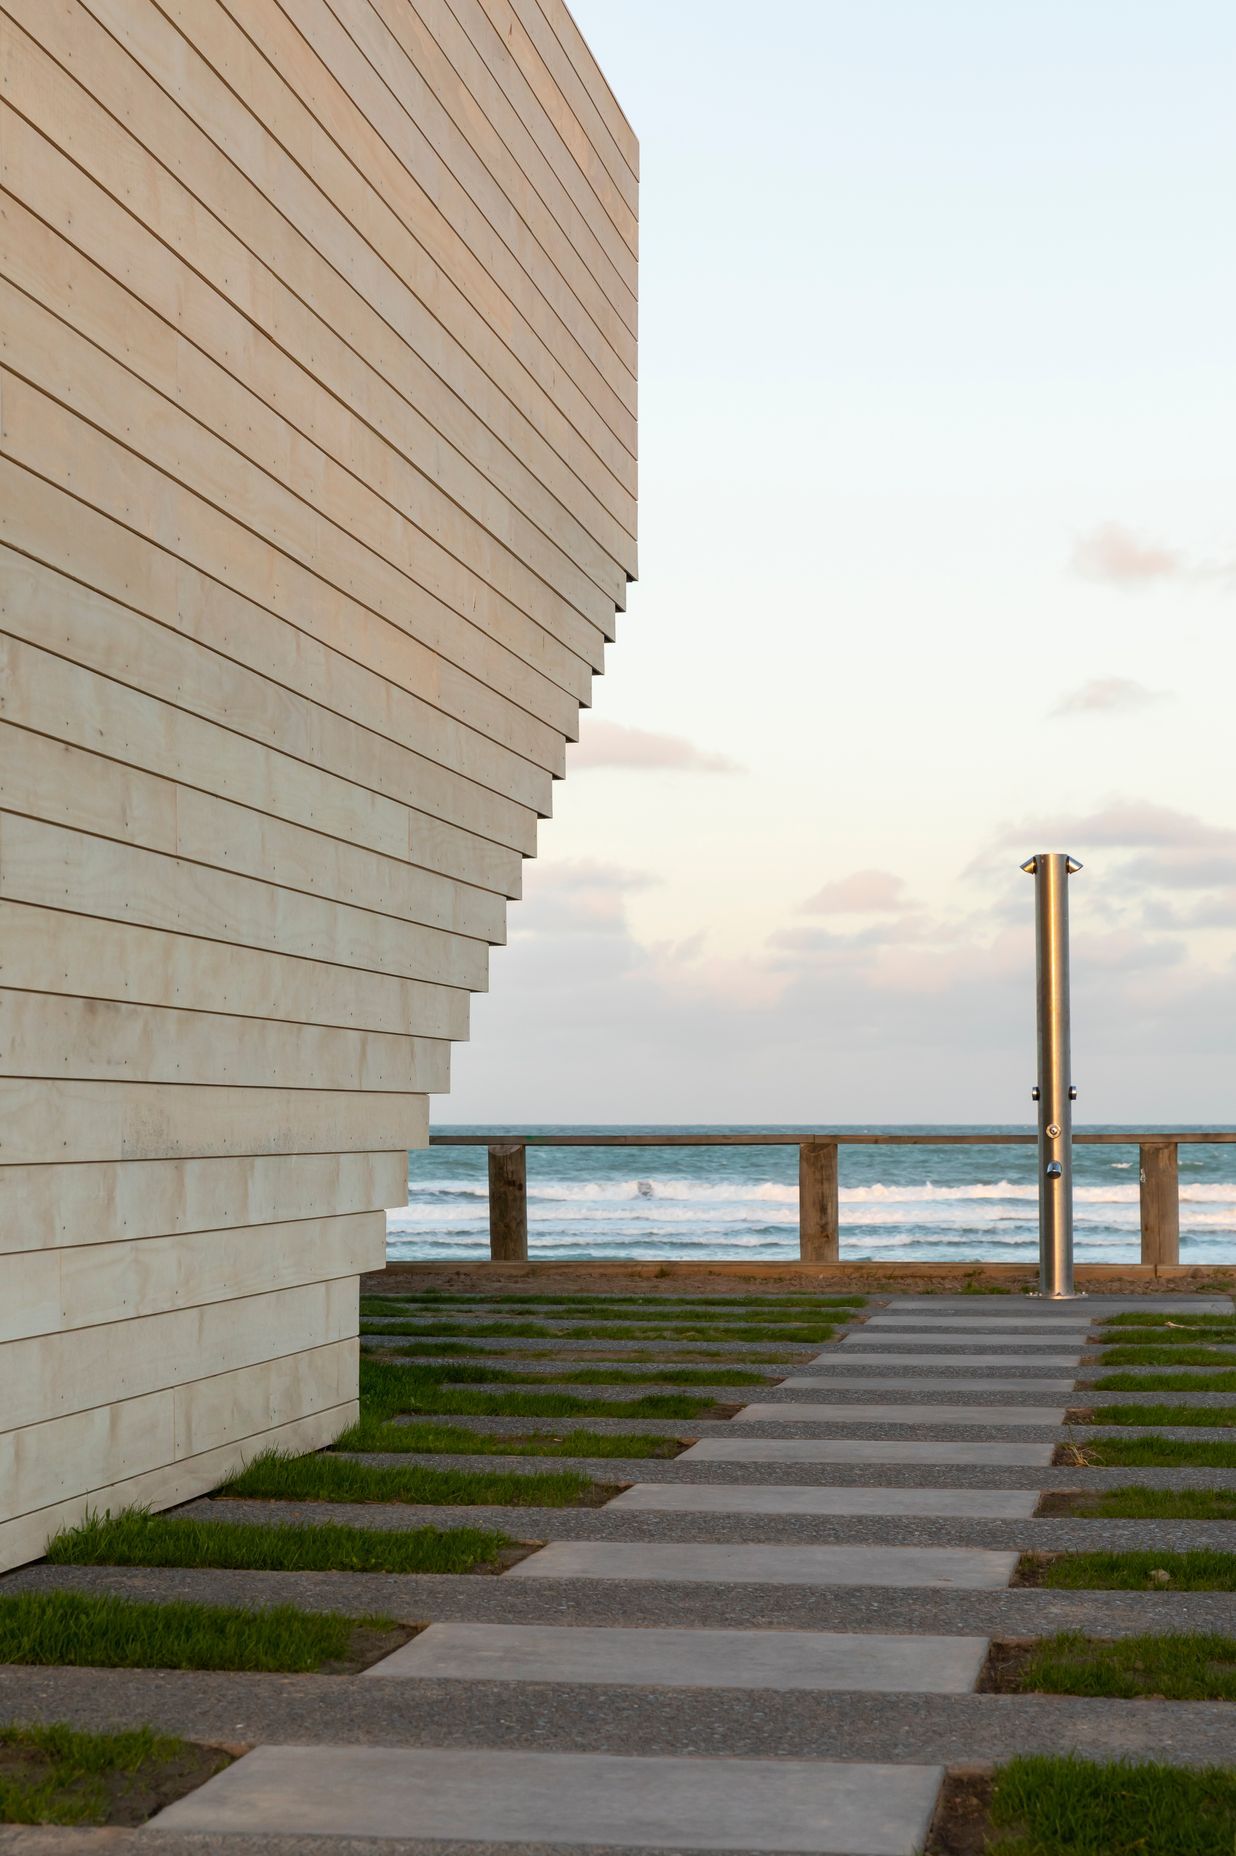 Running parallel to the ocean, concrete paths provides access around the Surf Club's perimeter.